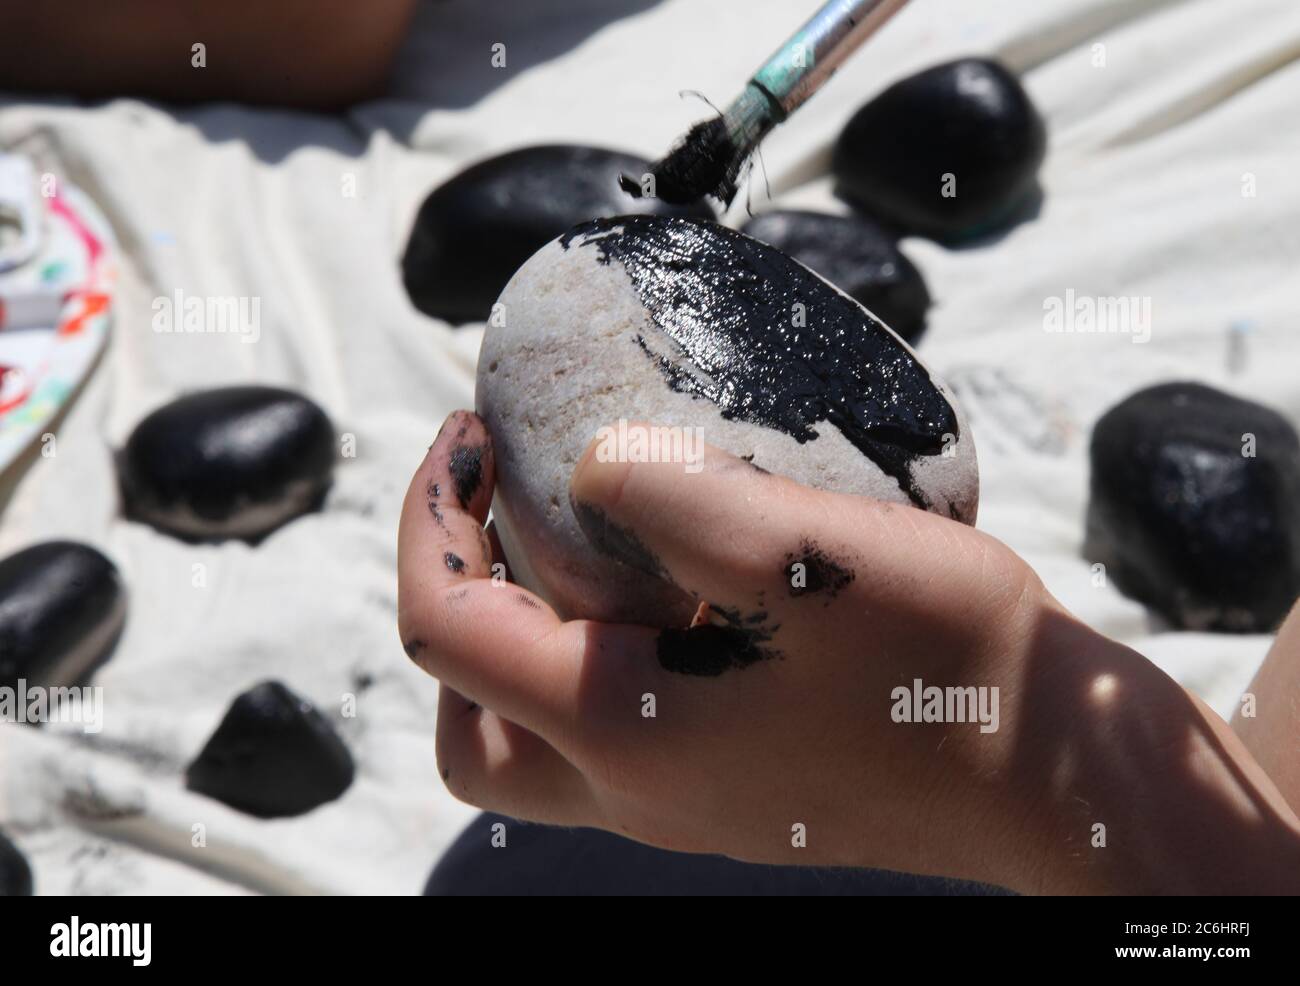 A child's hand rock painting holding a paintbrush children painting rocks, black paint on to rocks for Halloween outside, 2020 Stock Photo